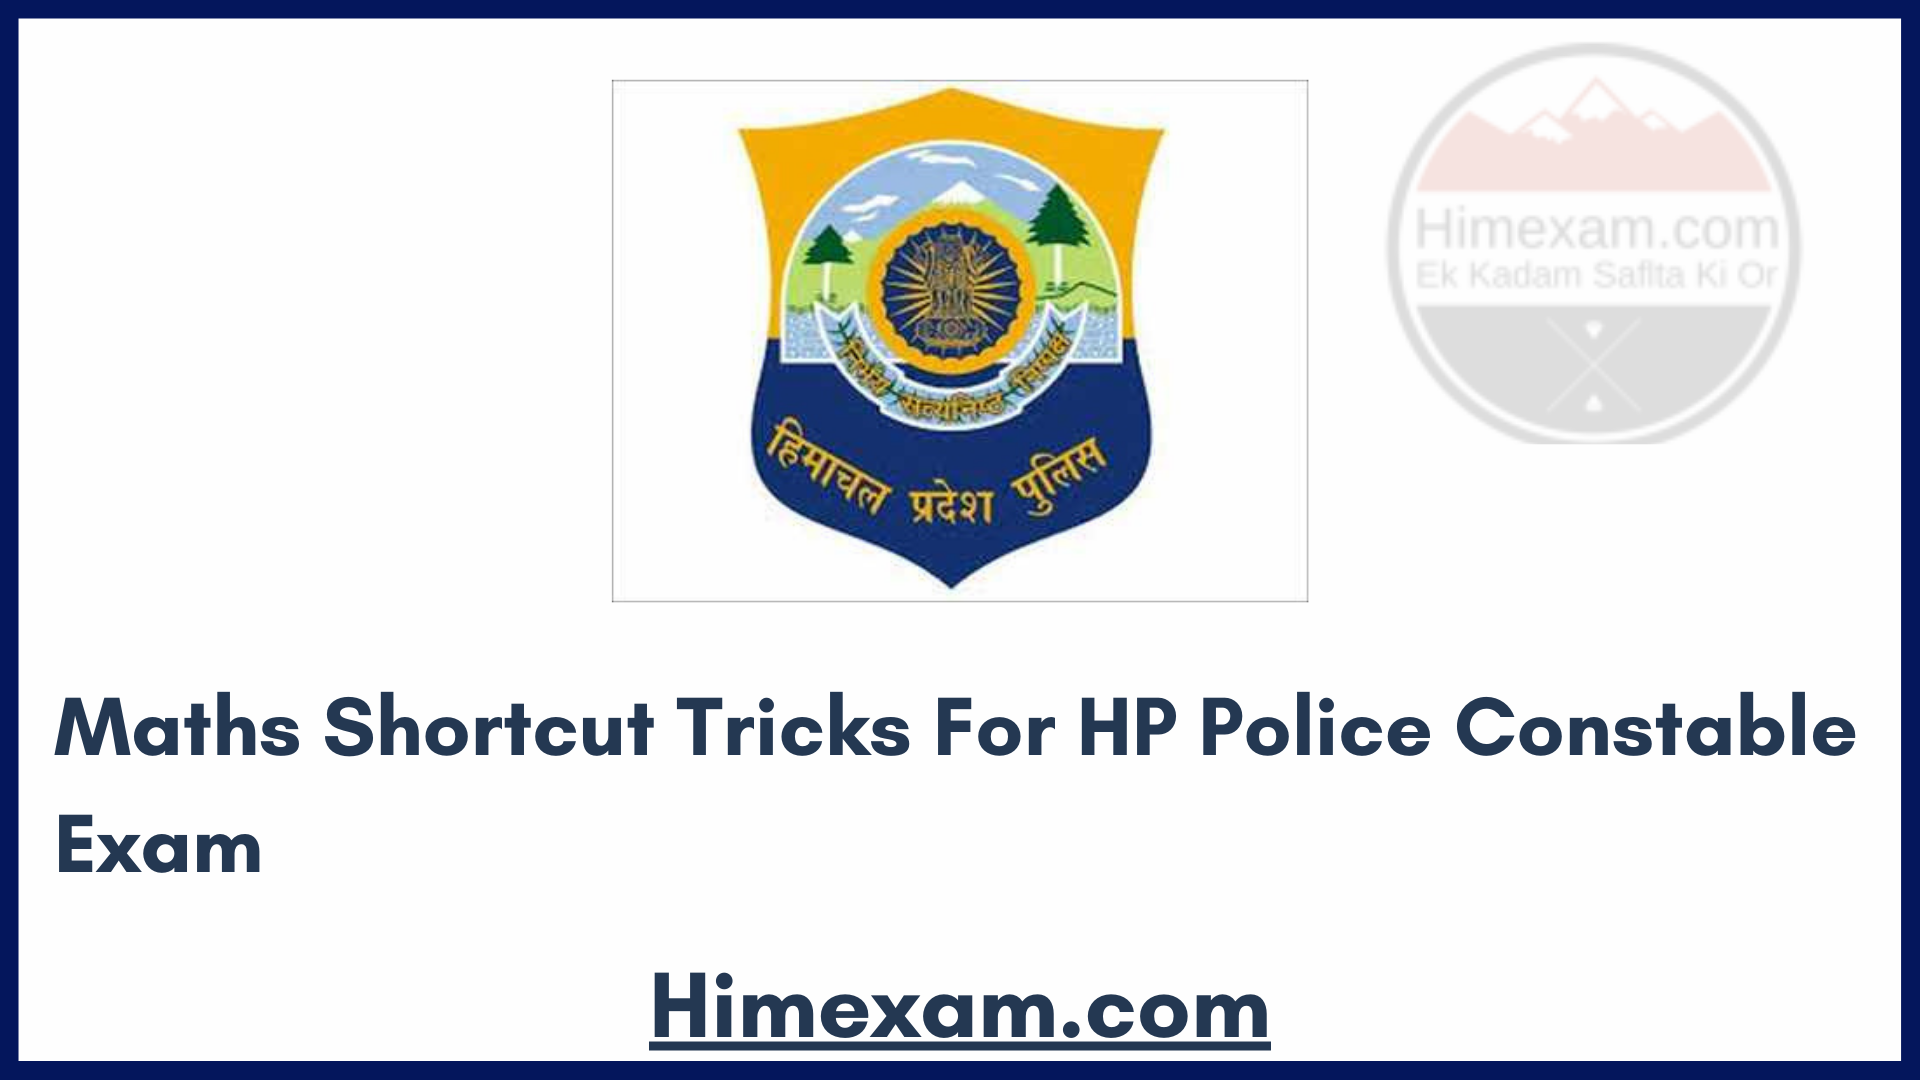 Maths Shortcut Tricks For HP Police Constable Exam